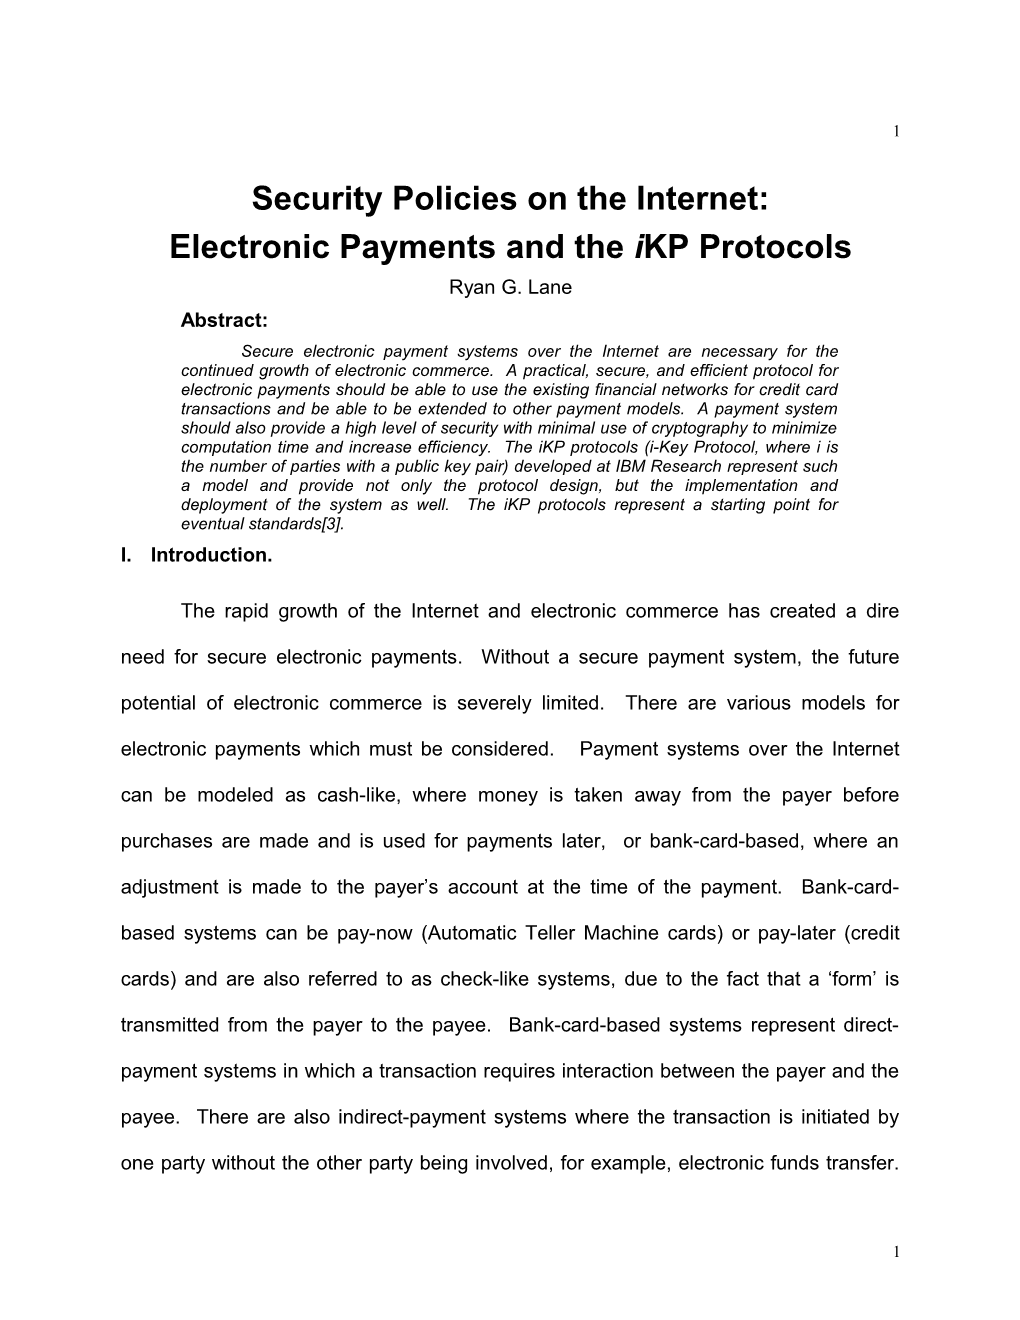 Security Policies on the Internet